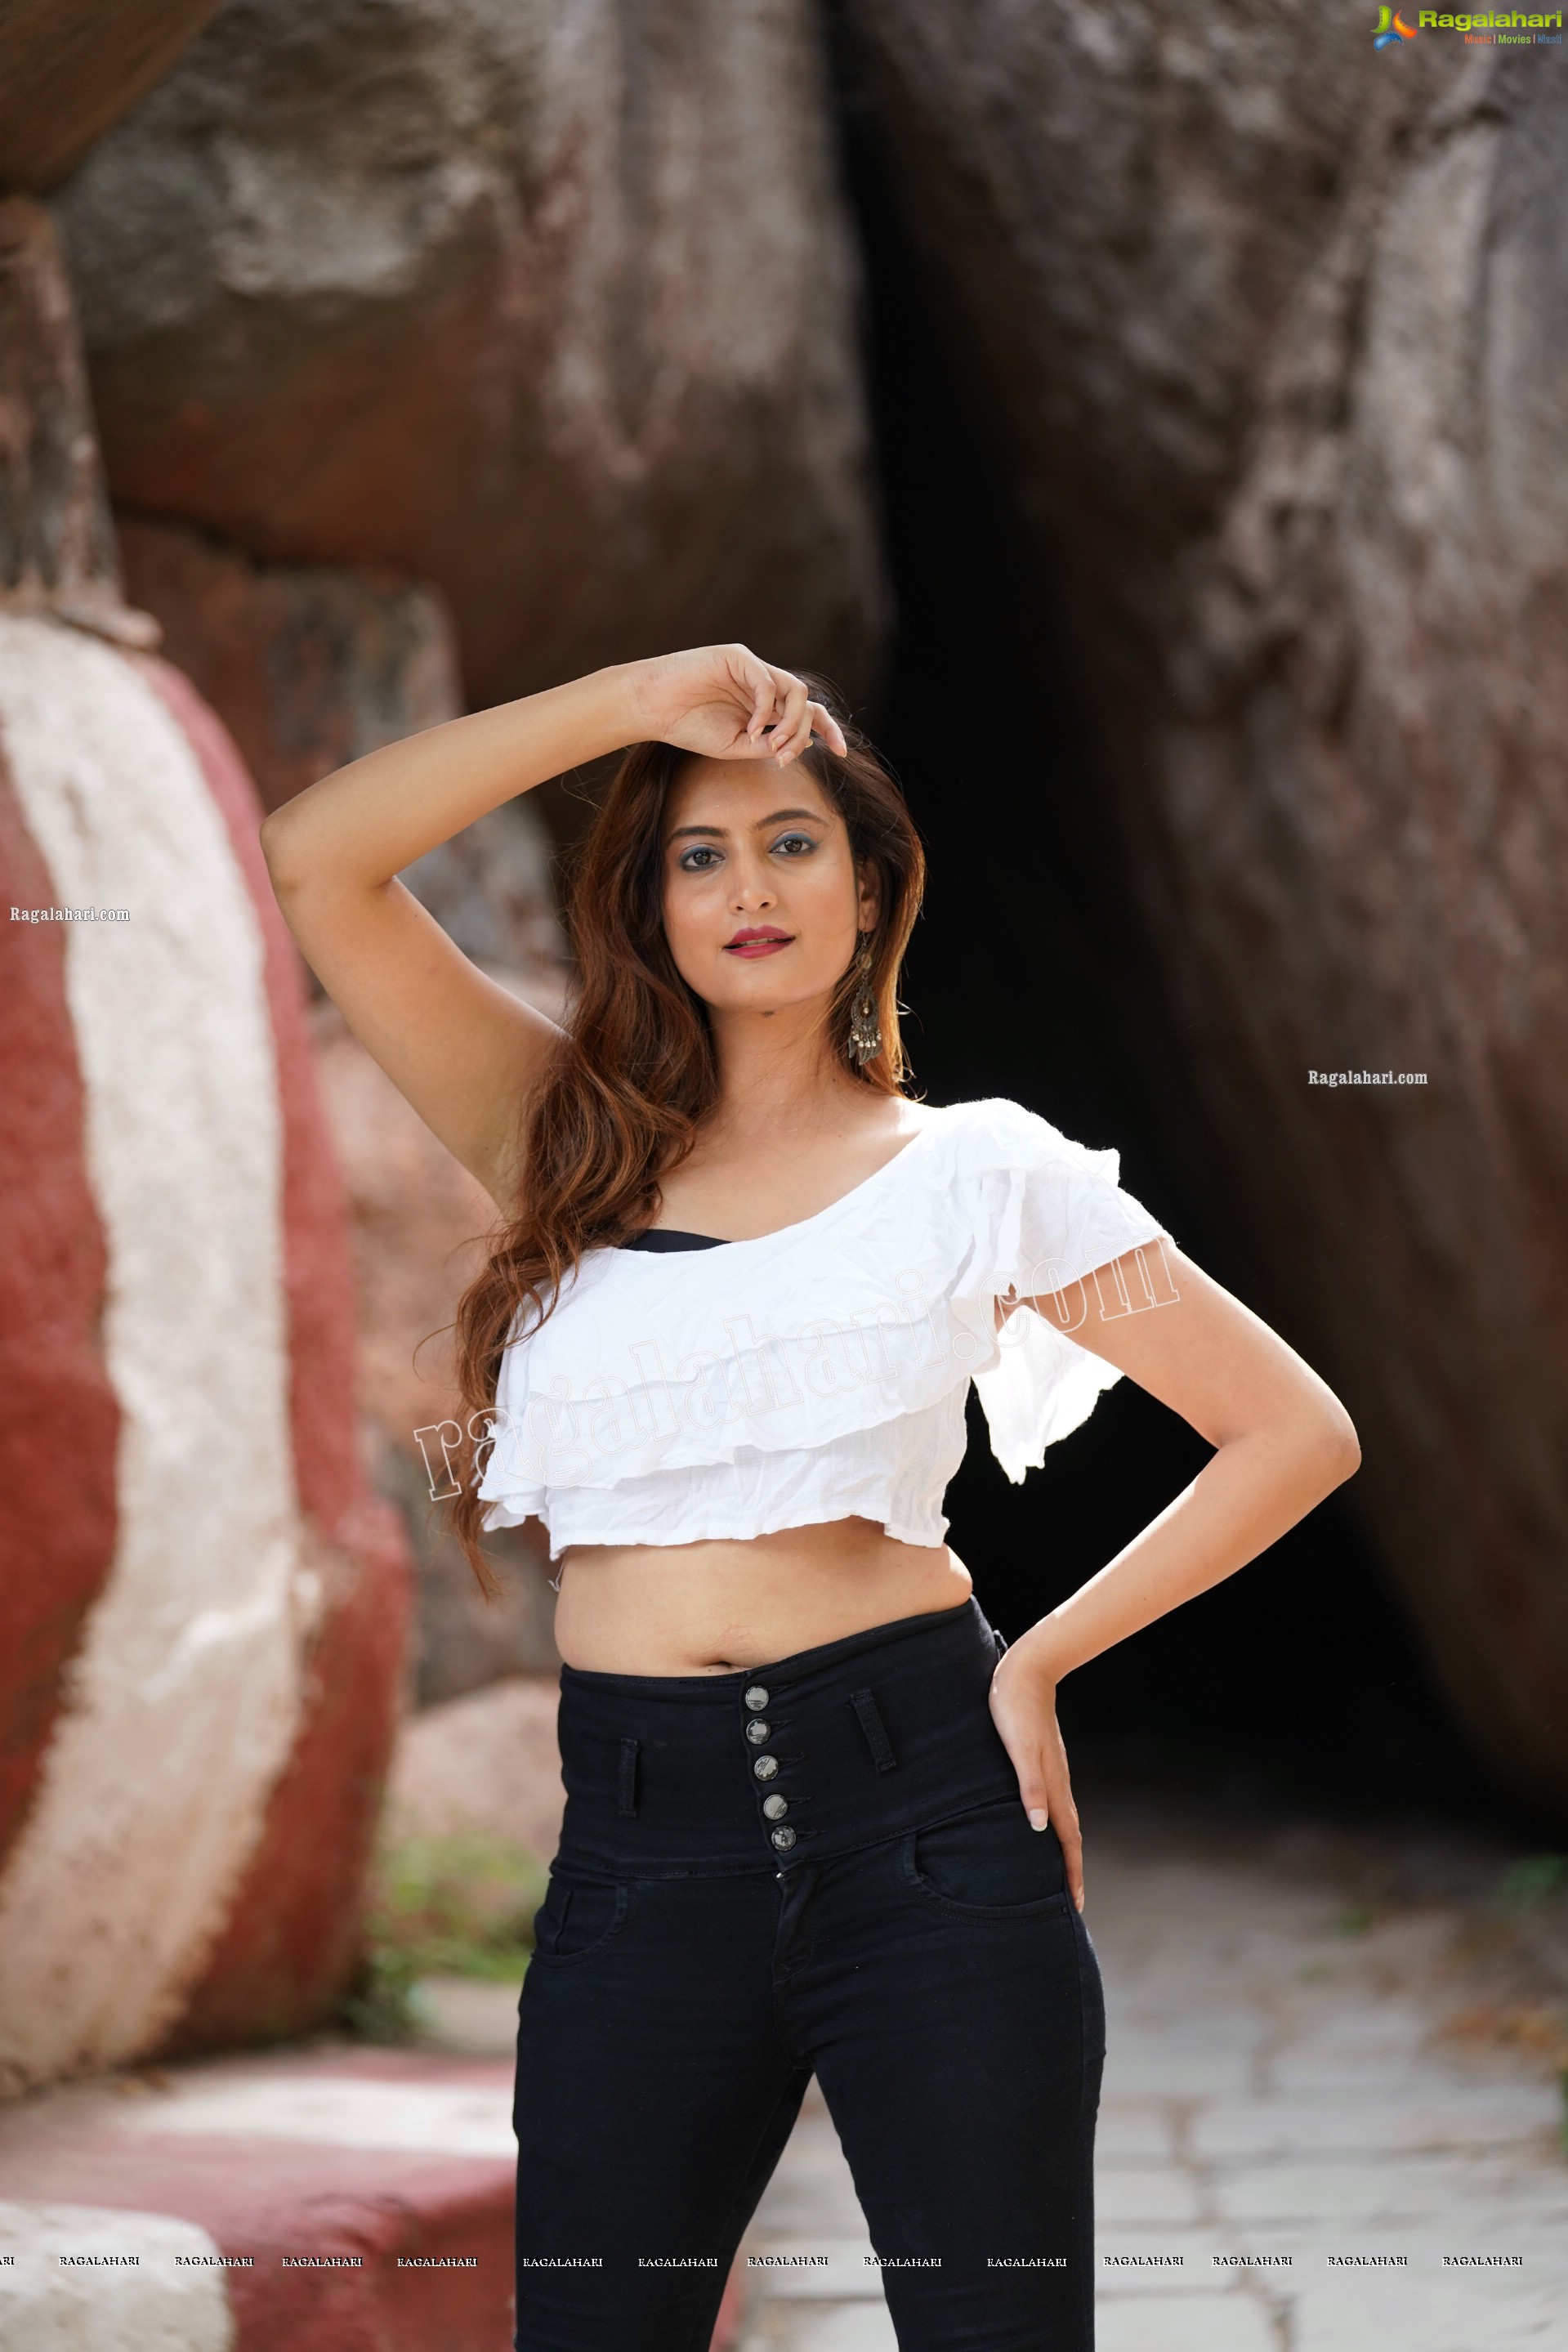 Dhriti Patel in White One-shoulder Ruffled Crop Top and Black Jeans, Exclusive Photo Shoot